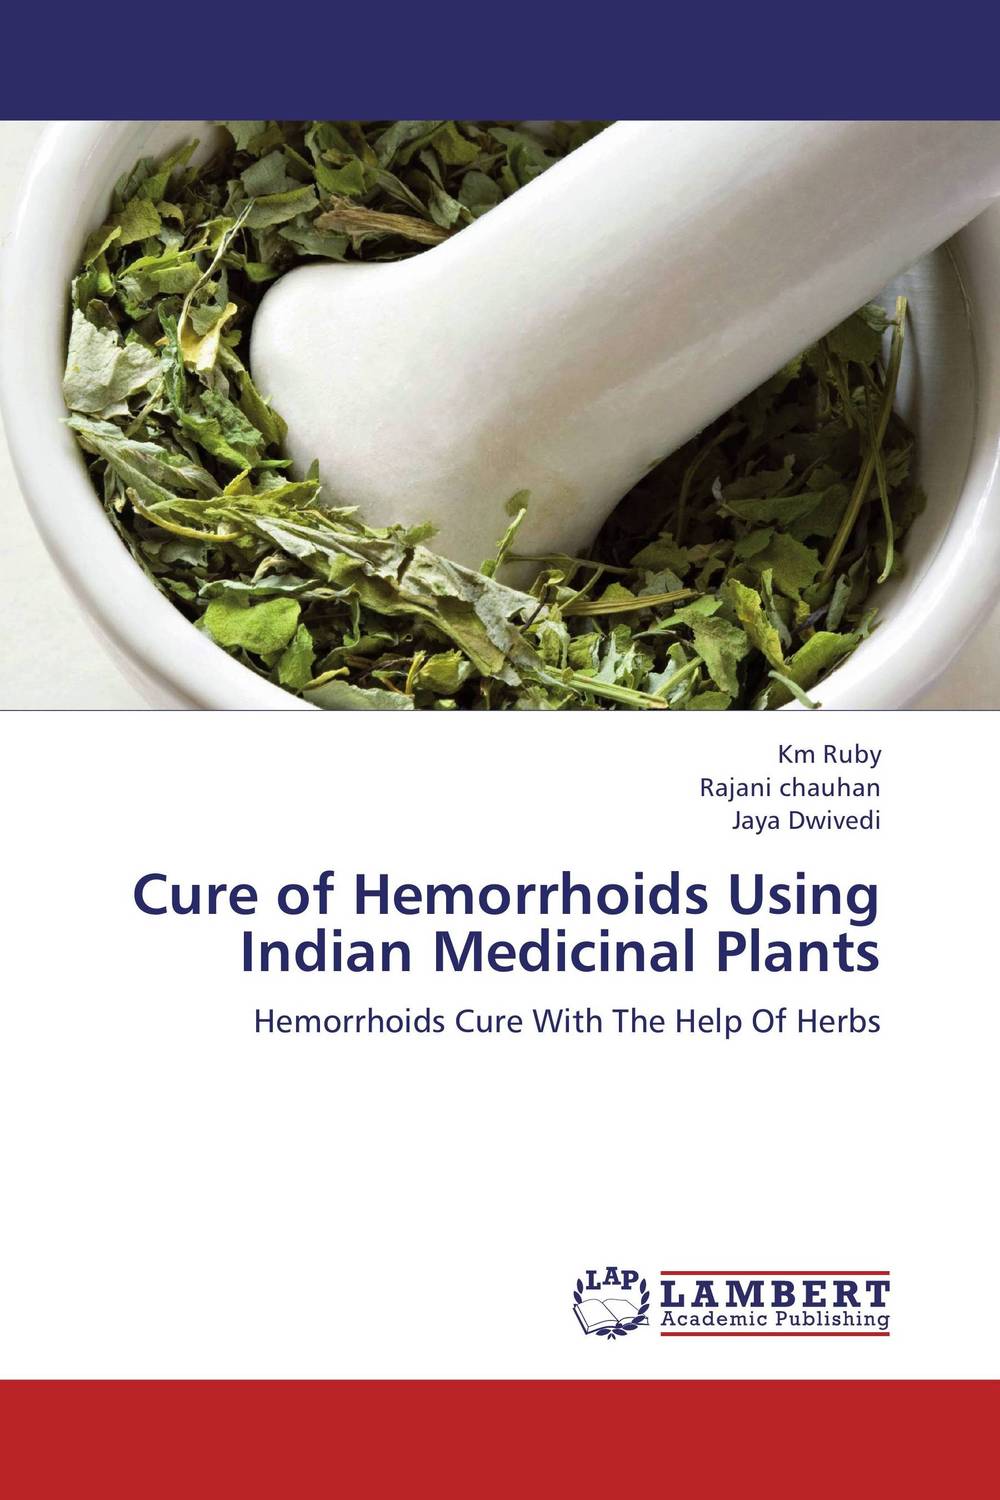 Cure of Hemorrhoids Using Indian Medicinal Plants